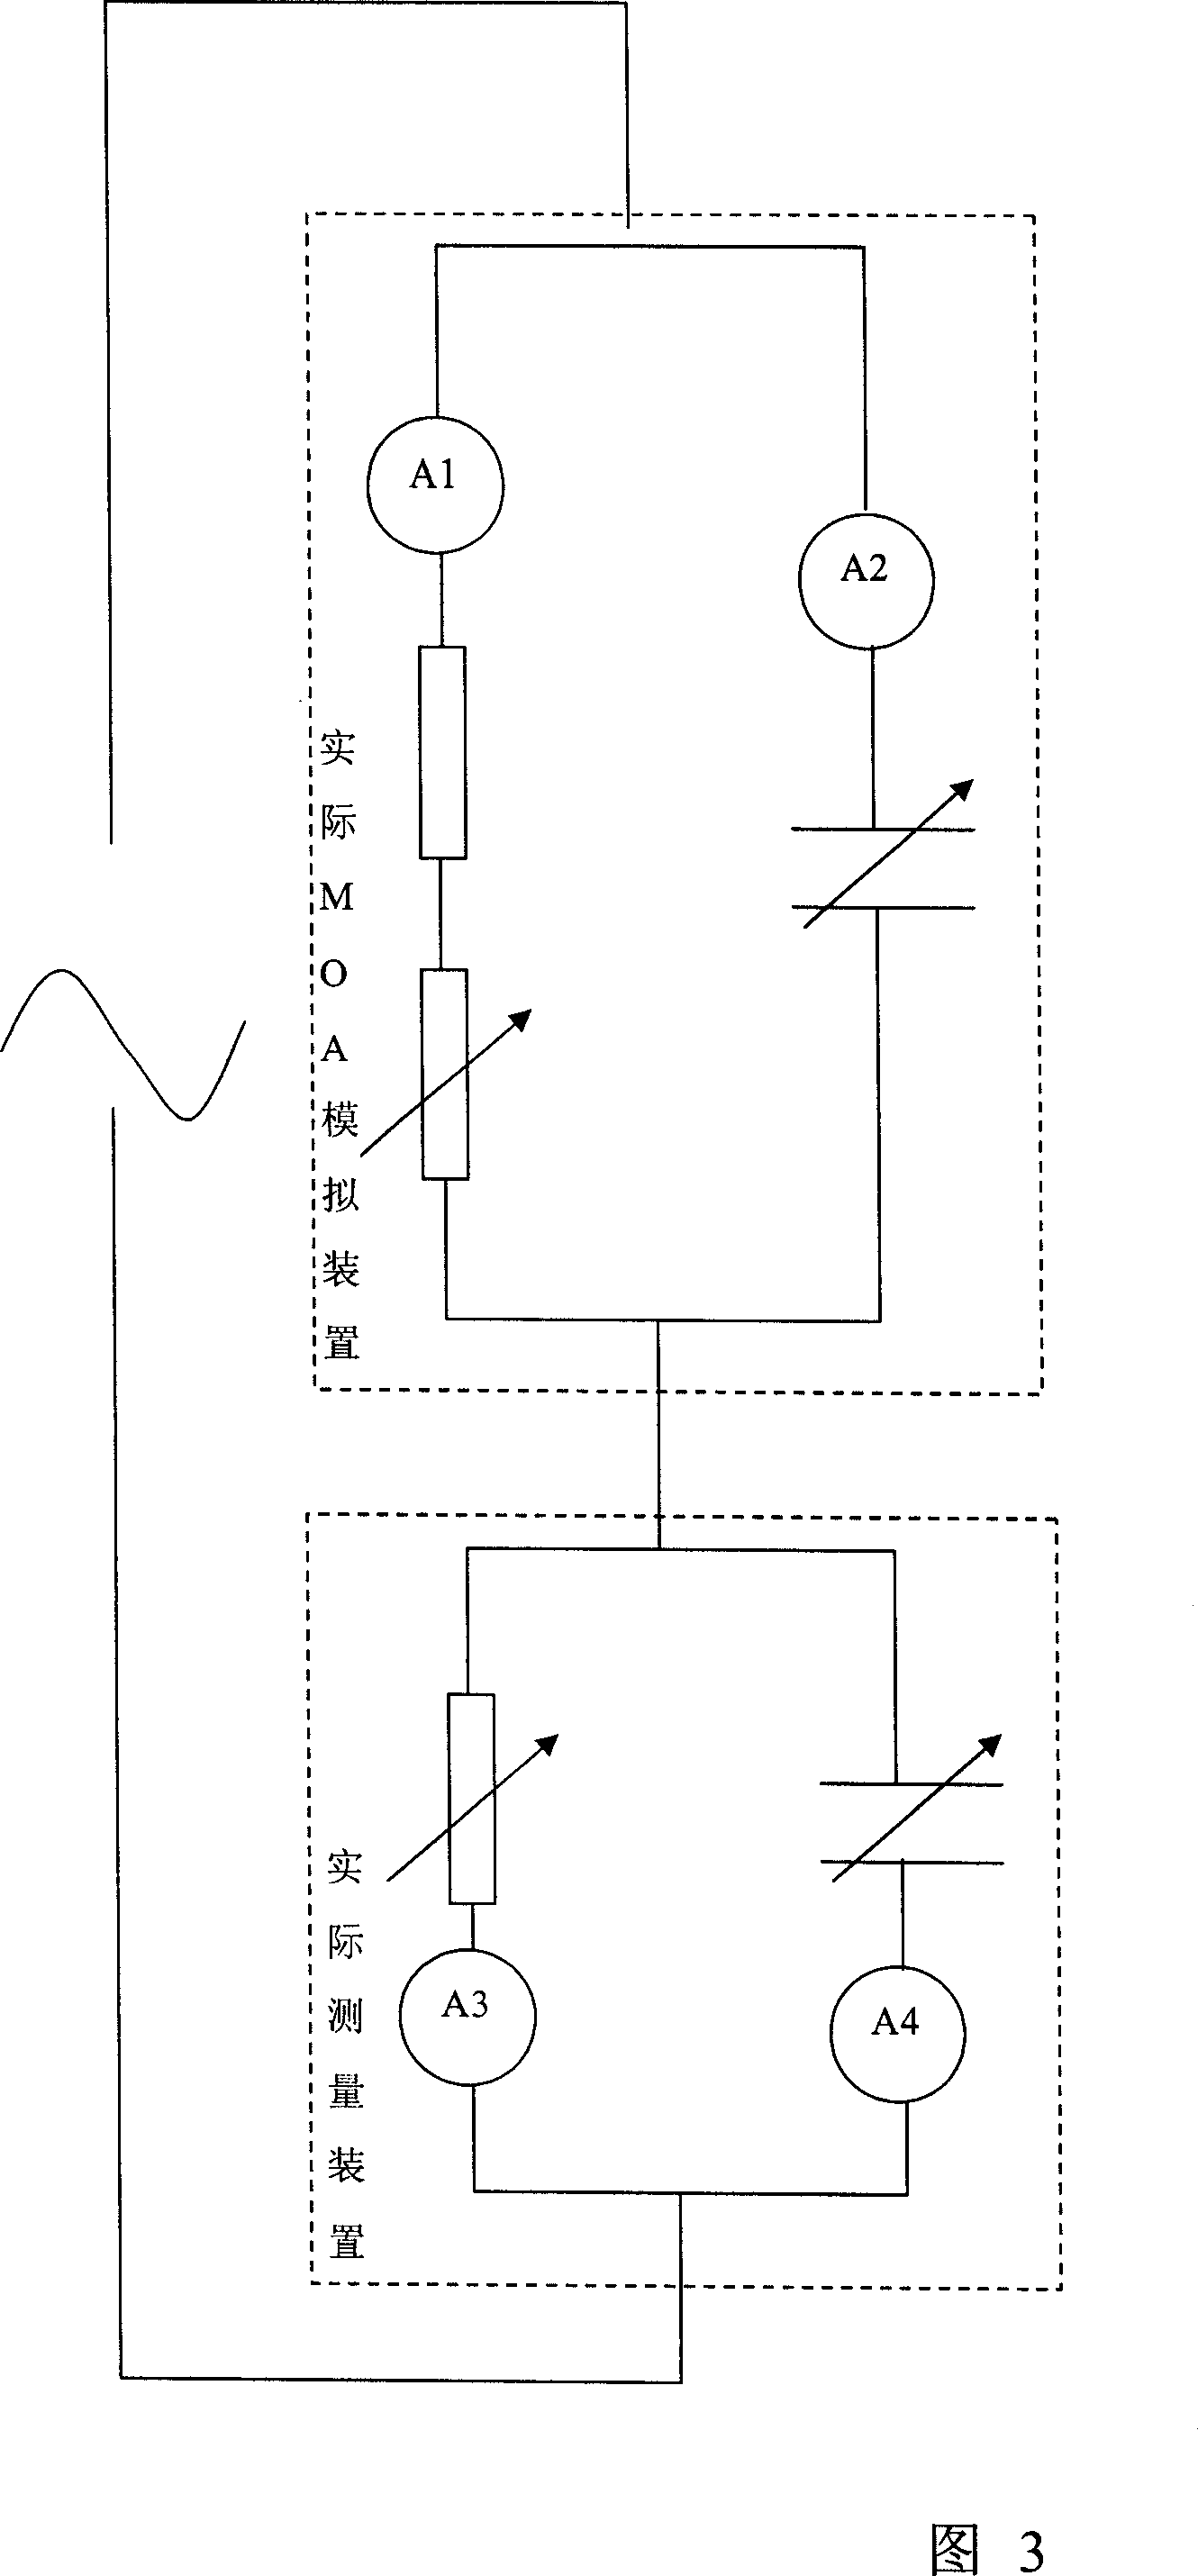 Method for monitoring resistant current in leakage current of an arrester